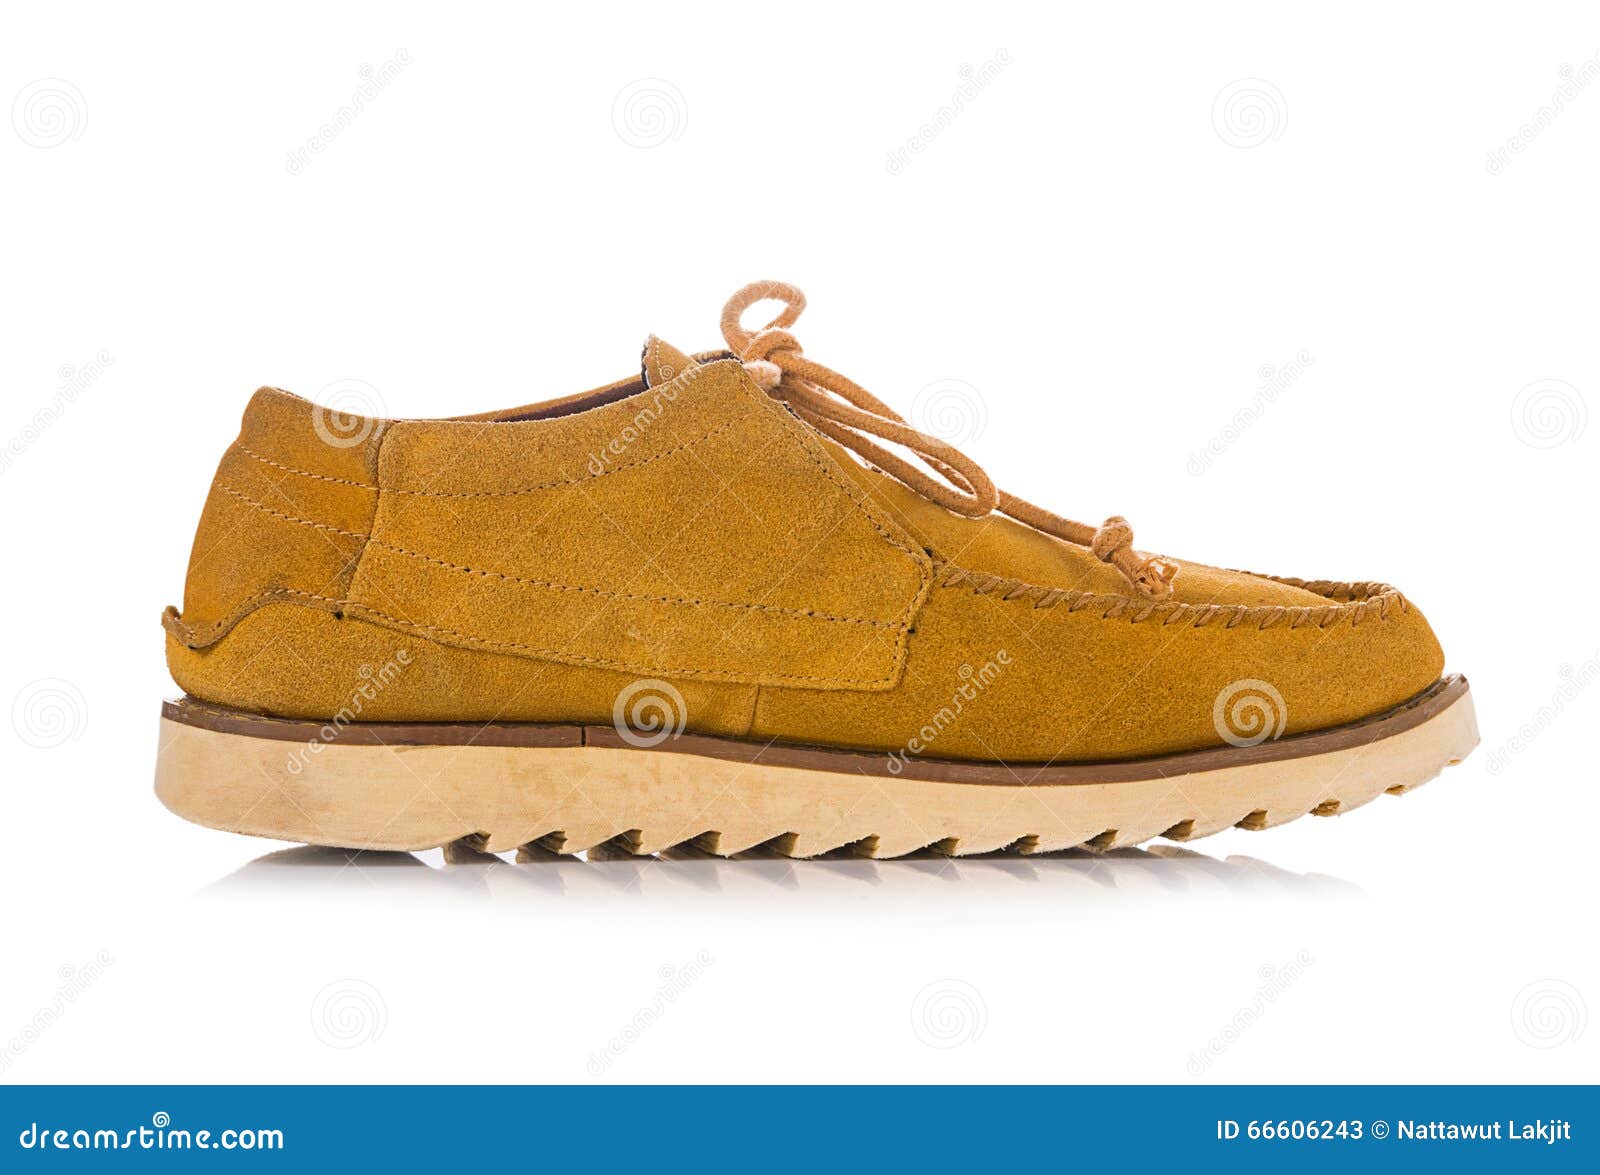 Leather Shoes on White Background Stock Image - Image of male, classic ...